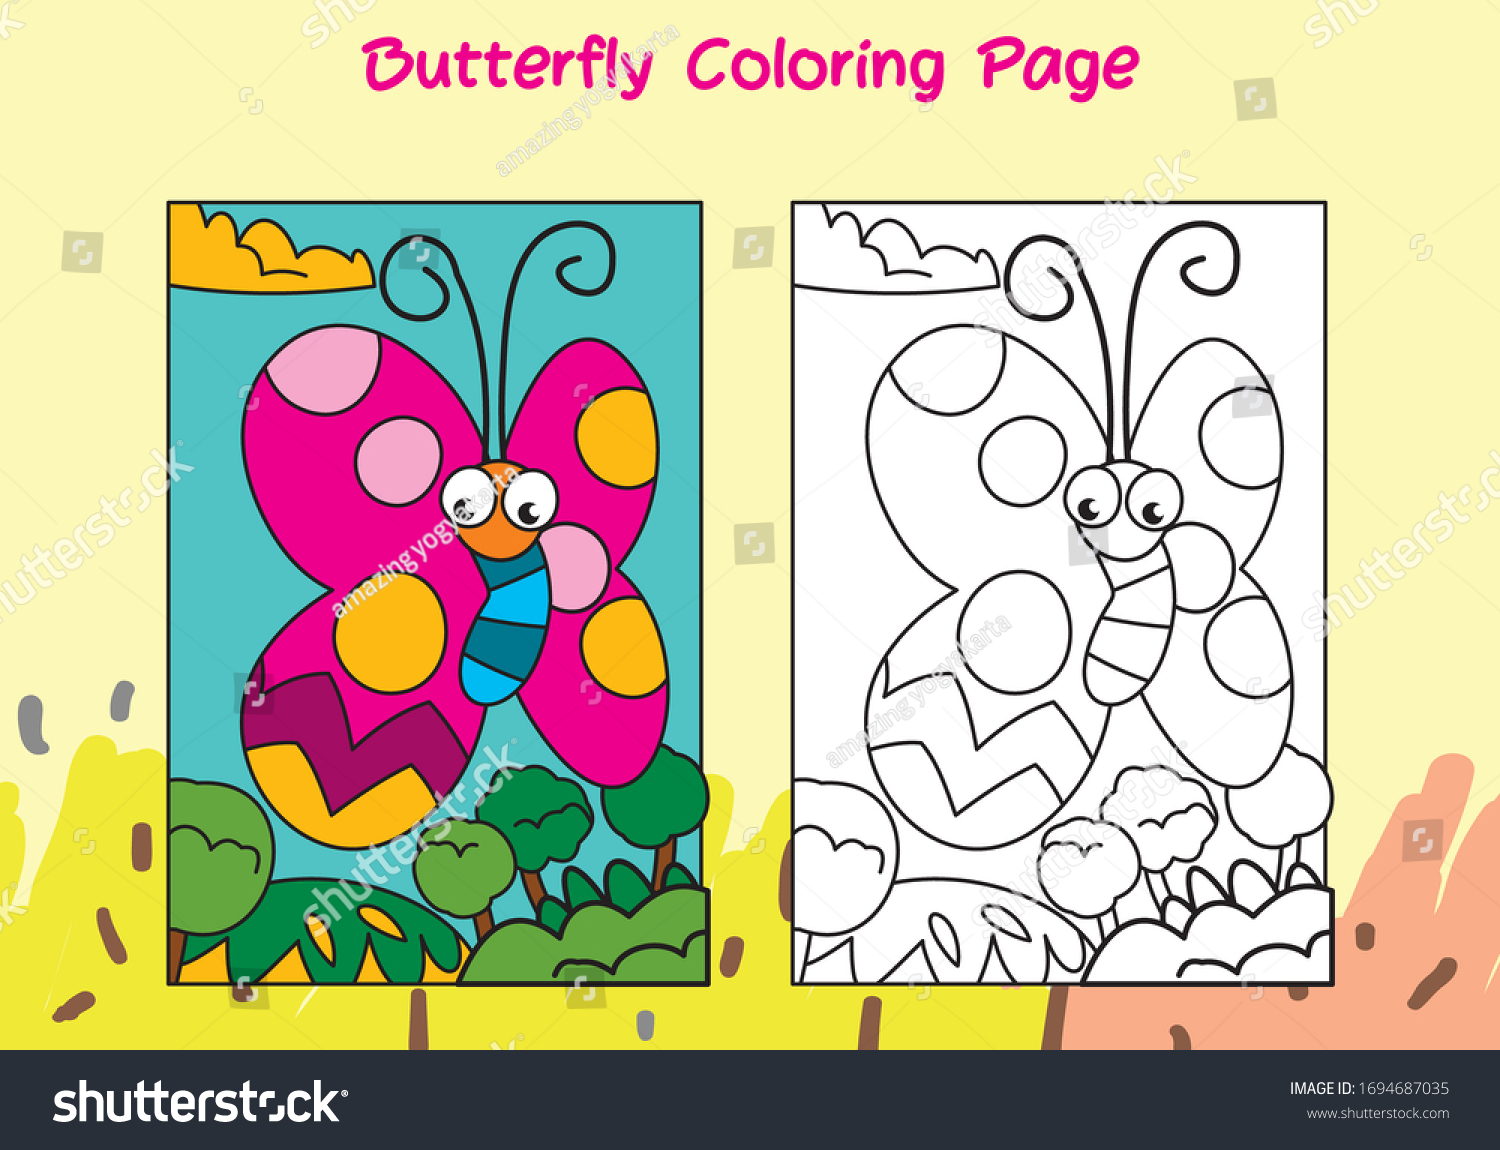 Butterfly Coloring Page Kids Sample Full Stock Vector Royalty ...